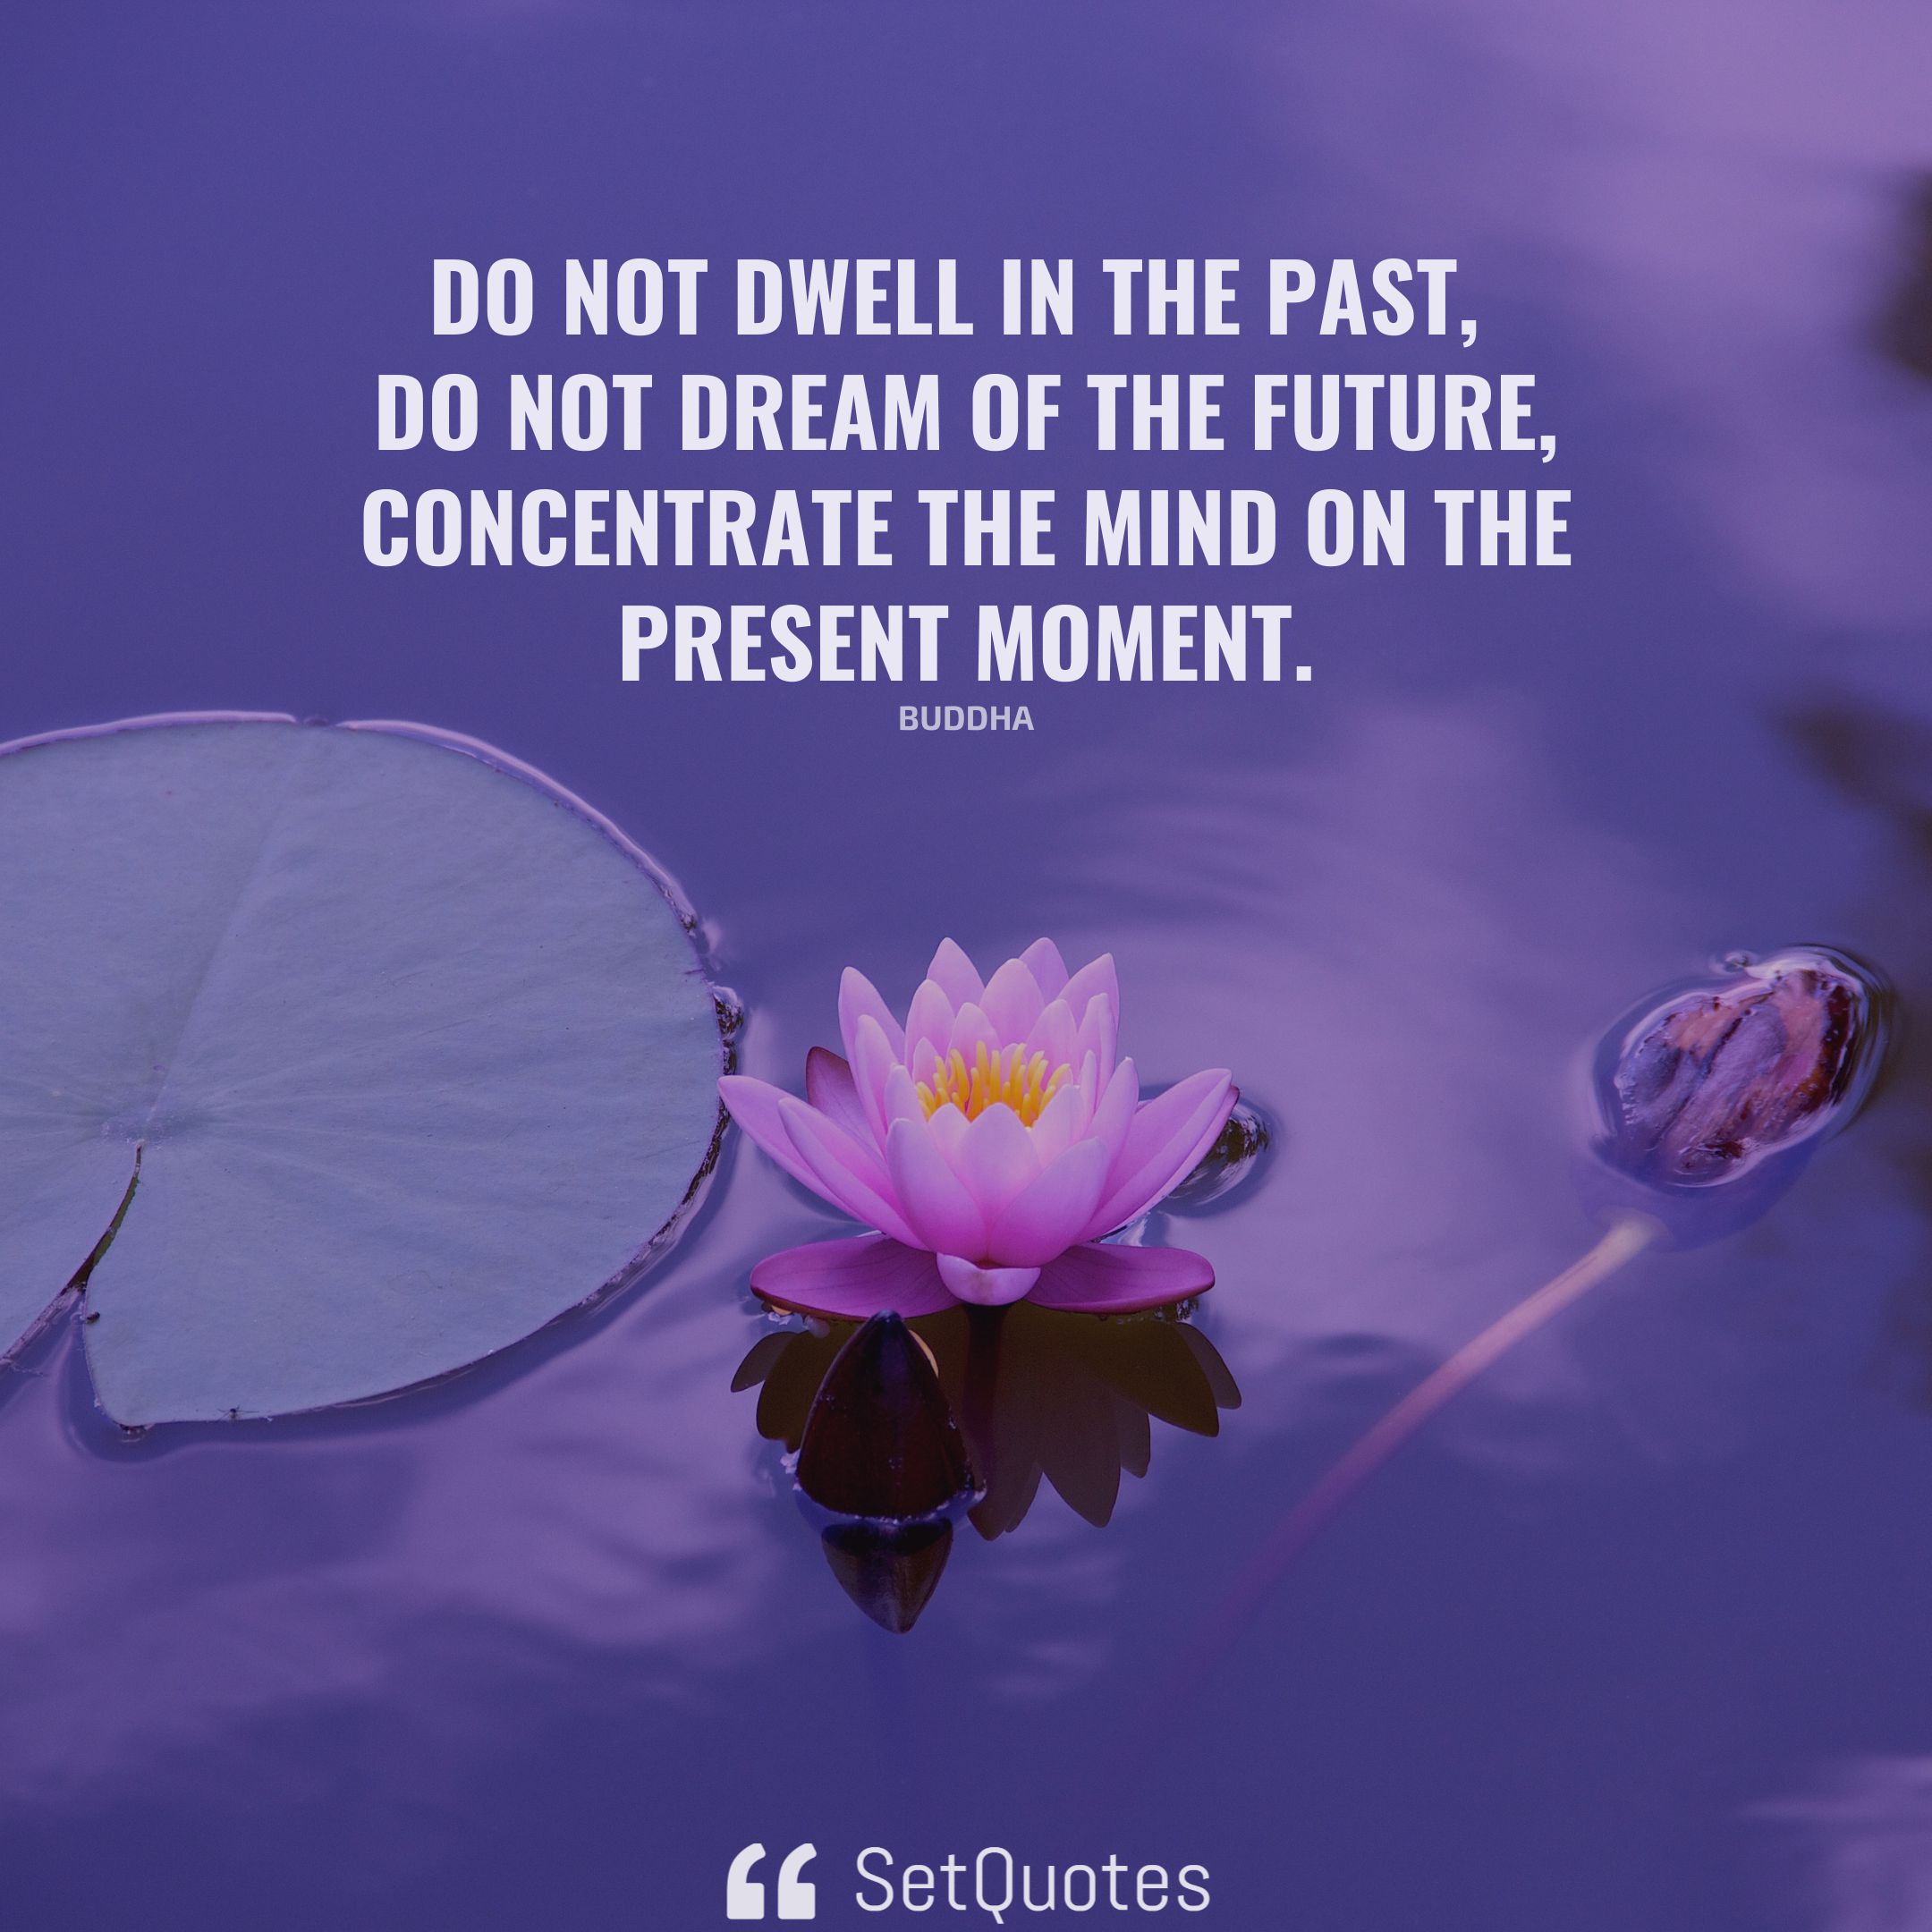 Do not dwell in the past, do not dream of the future, concentrate the mind on the present moment. – Buddha